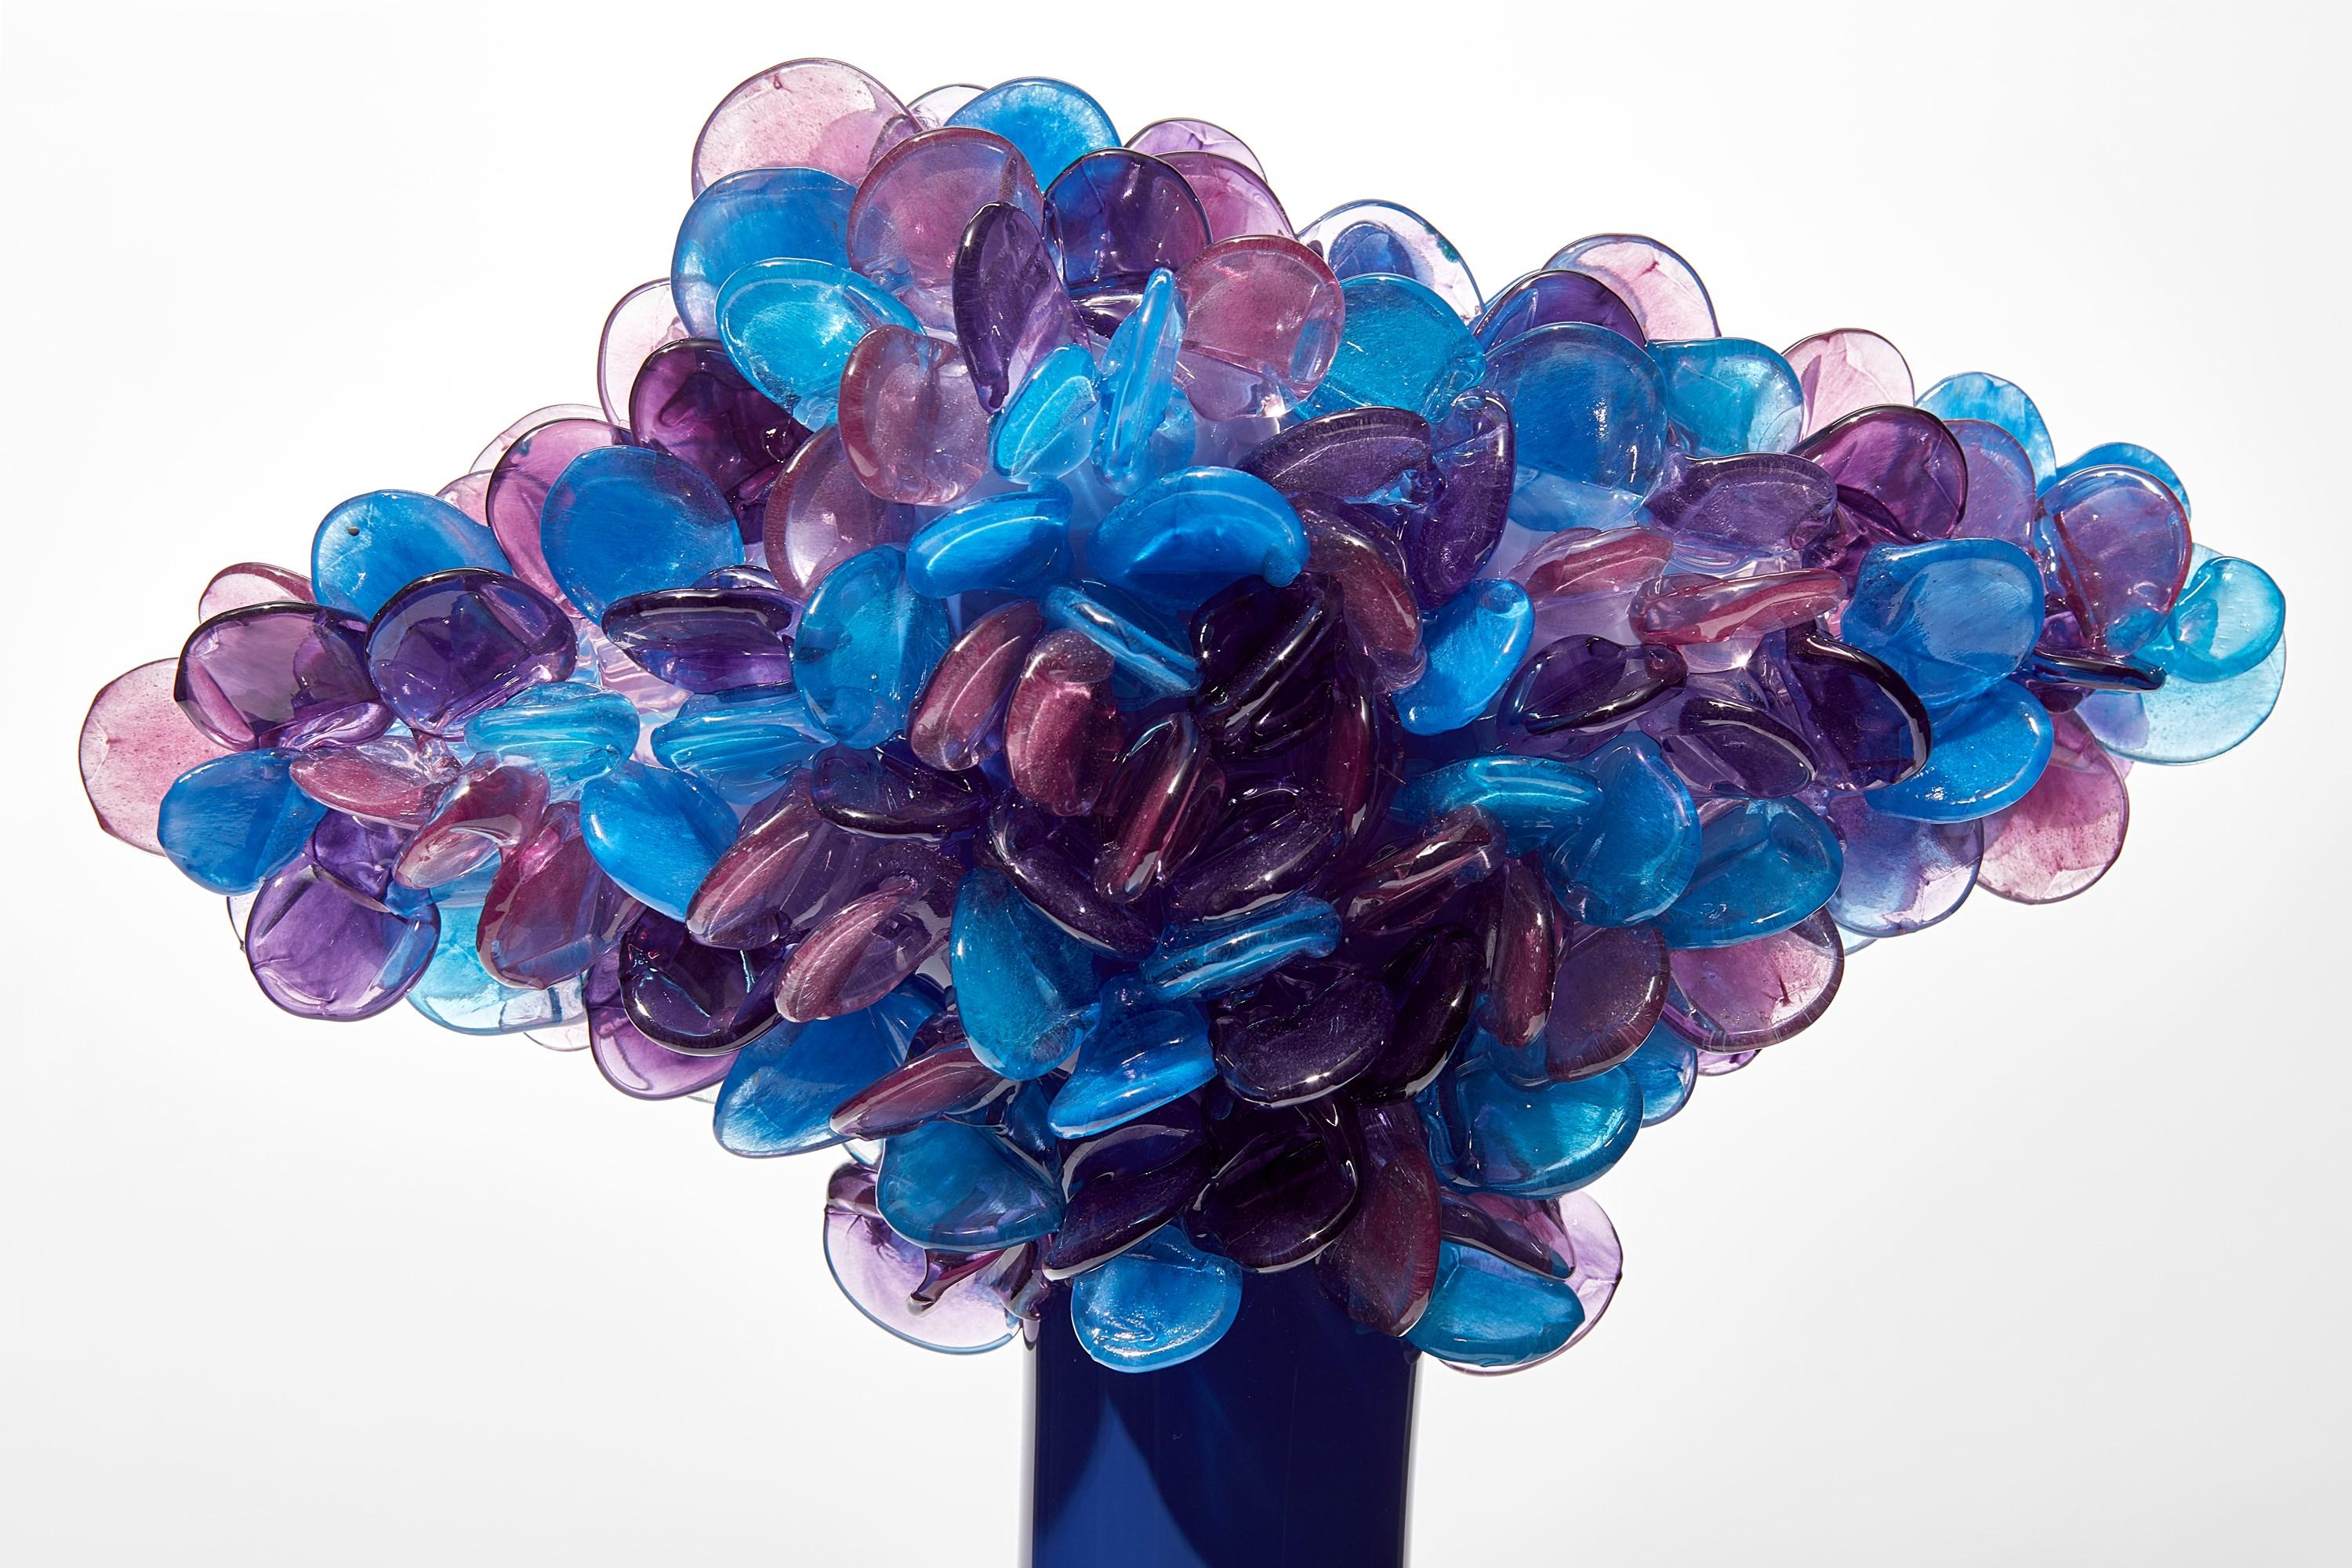 Organic Modern Enchanted Dawn in Iron Blue III, tree inspired glass sculpture by Louis Thompson